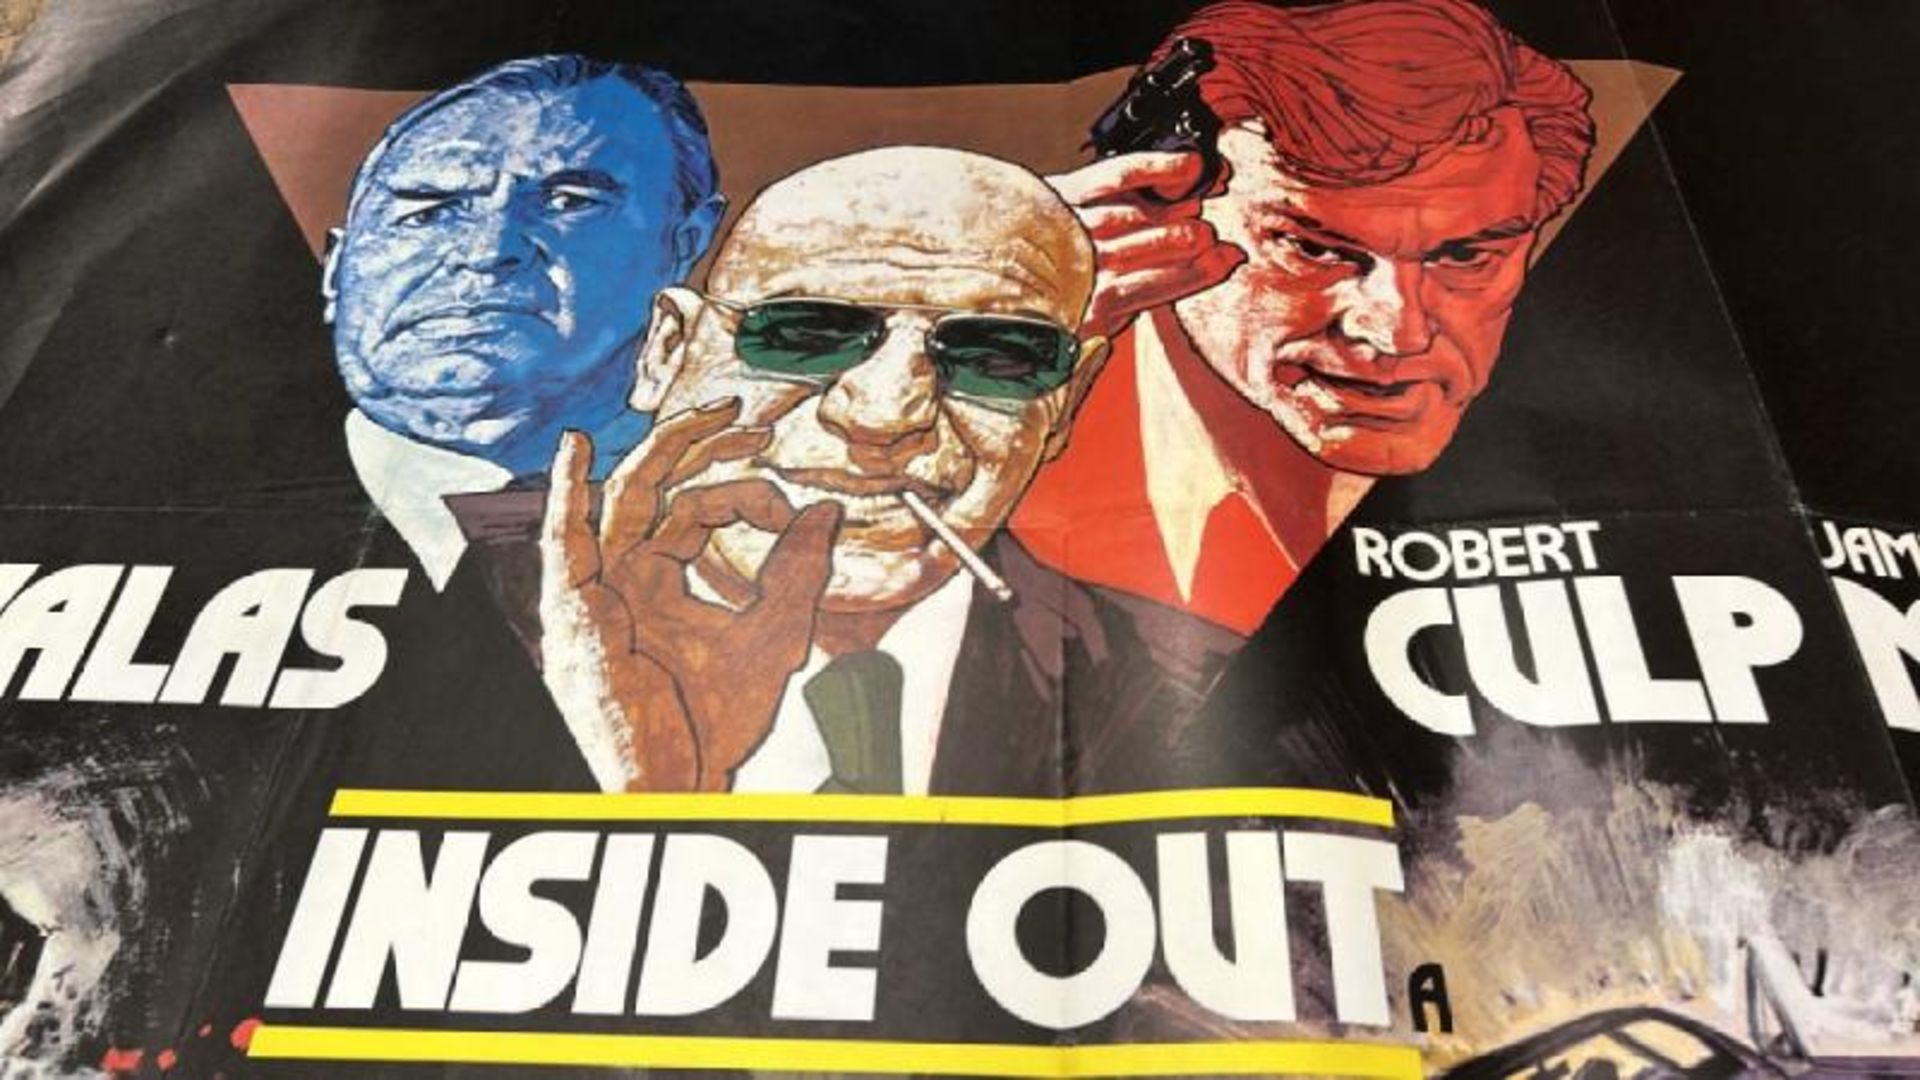 INSIDE OUT ORIGINAL POSTER PRINTED IN ENGLAND BY W. E. BERRY LTD BRADFORD, 101CM W X 77CM H, A - Bild 4 aus 6